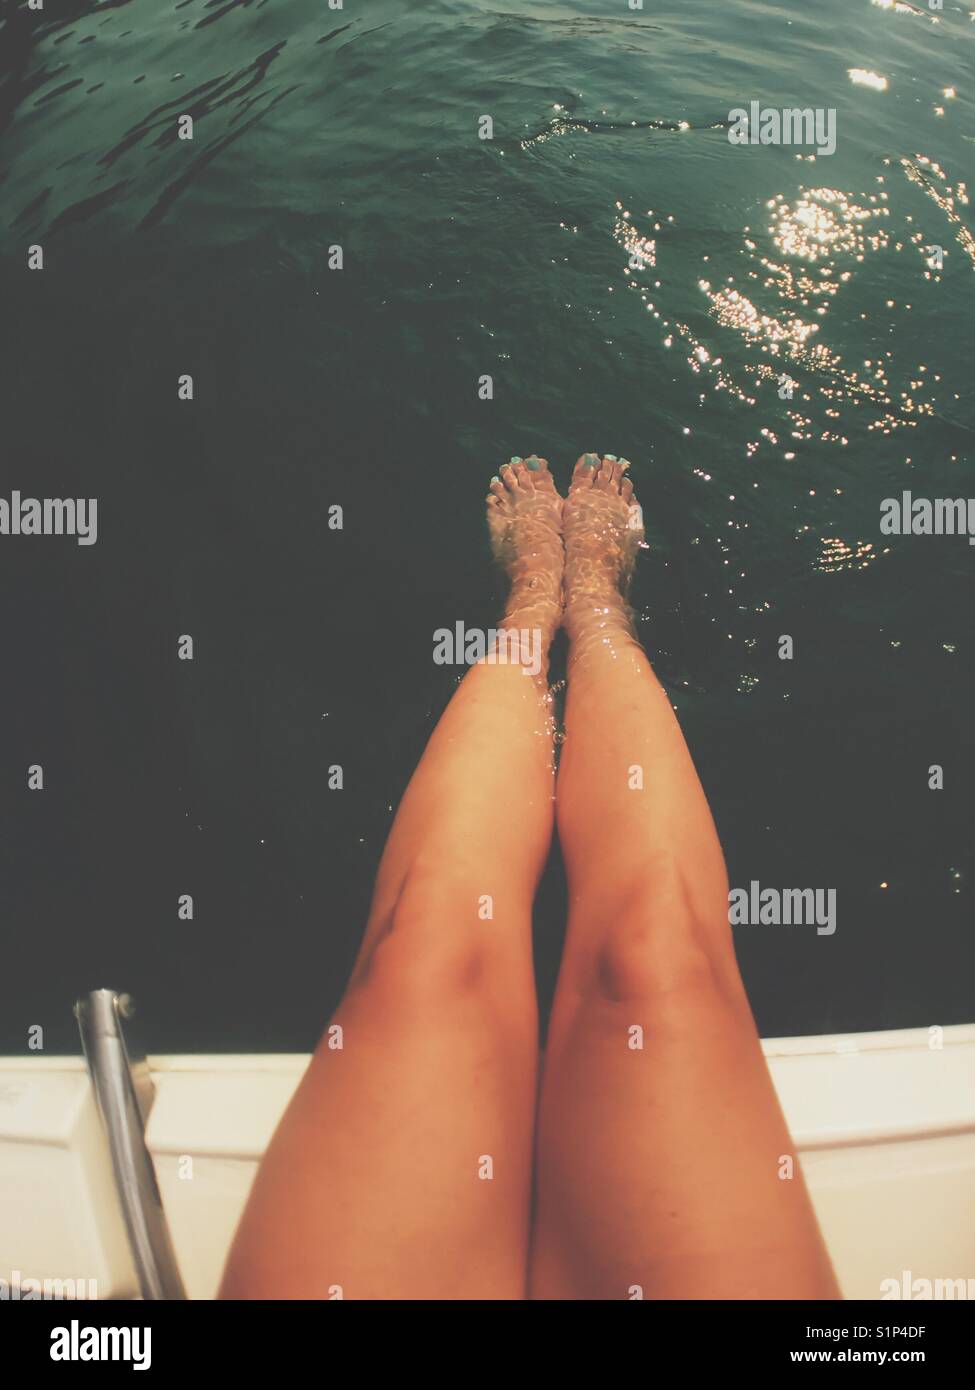 Legs of tanned woman sitting at the edge of a boat with feet submerged in water. Stock Photo